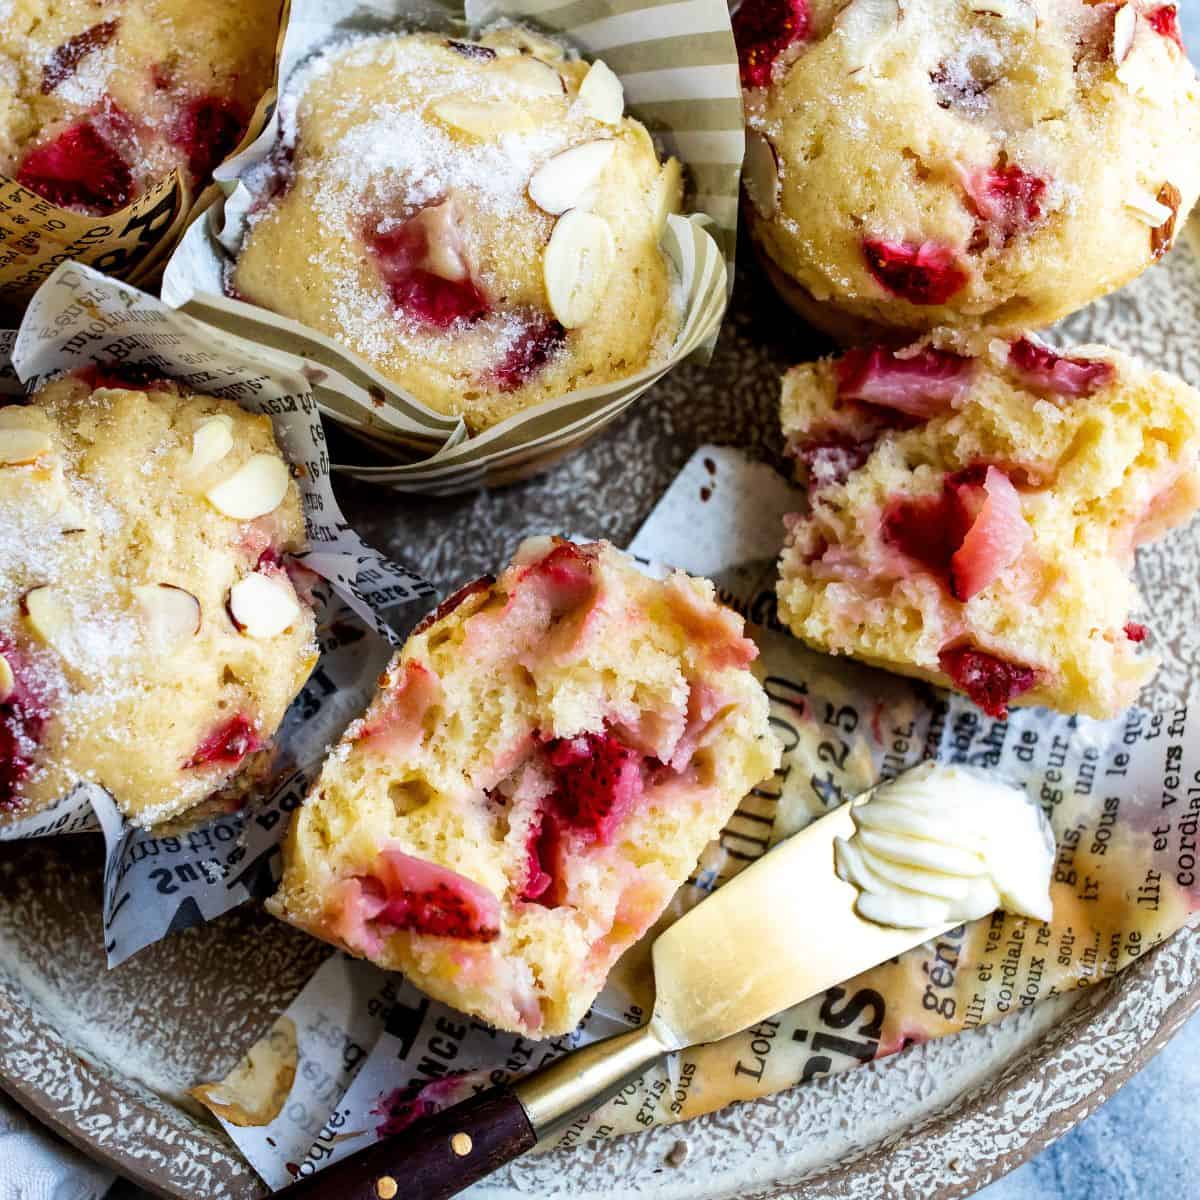 Strawberry muffins in paper holders with sugar topping.